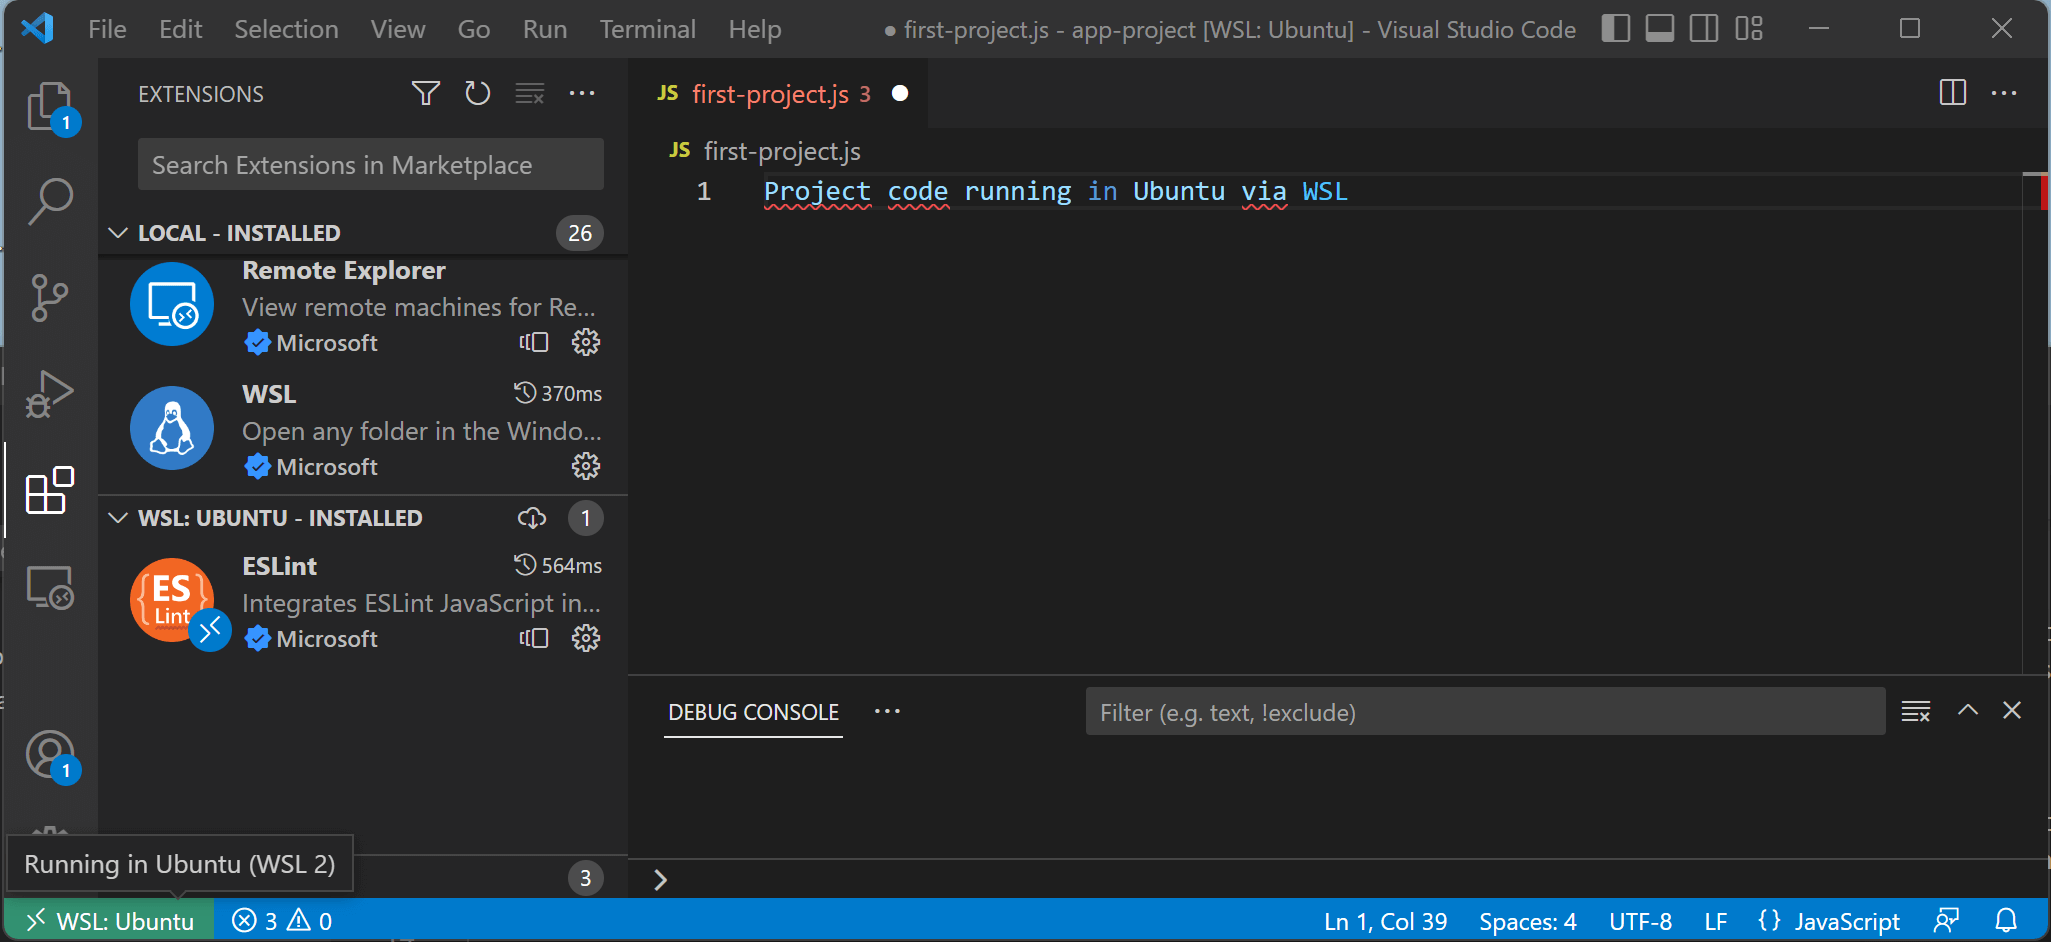 Screen capture of project code stored in Ubuntu opened in VS Code with the WSL Extension.